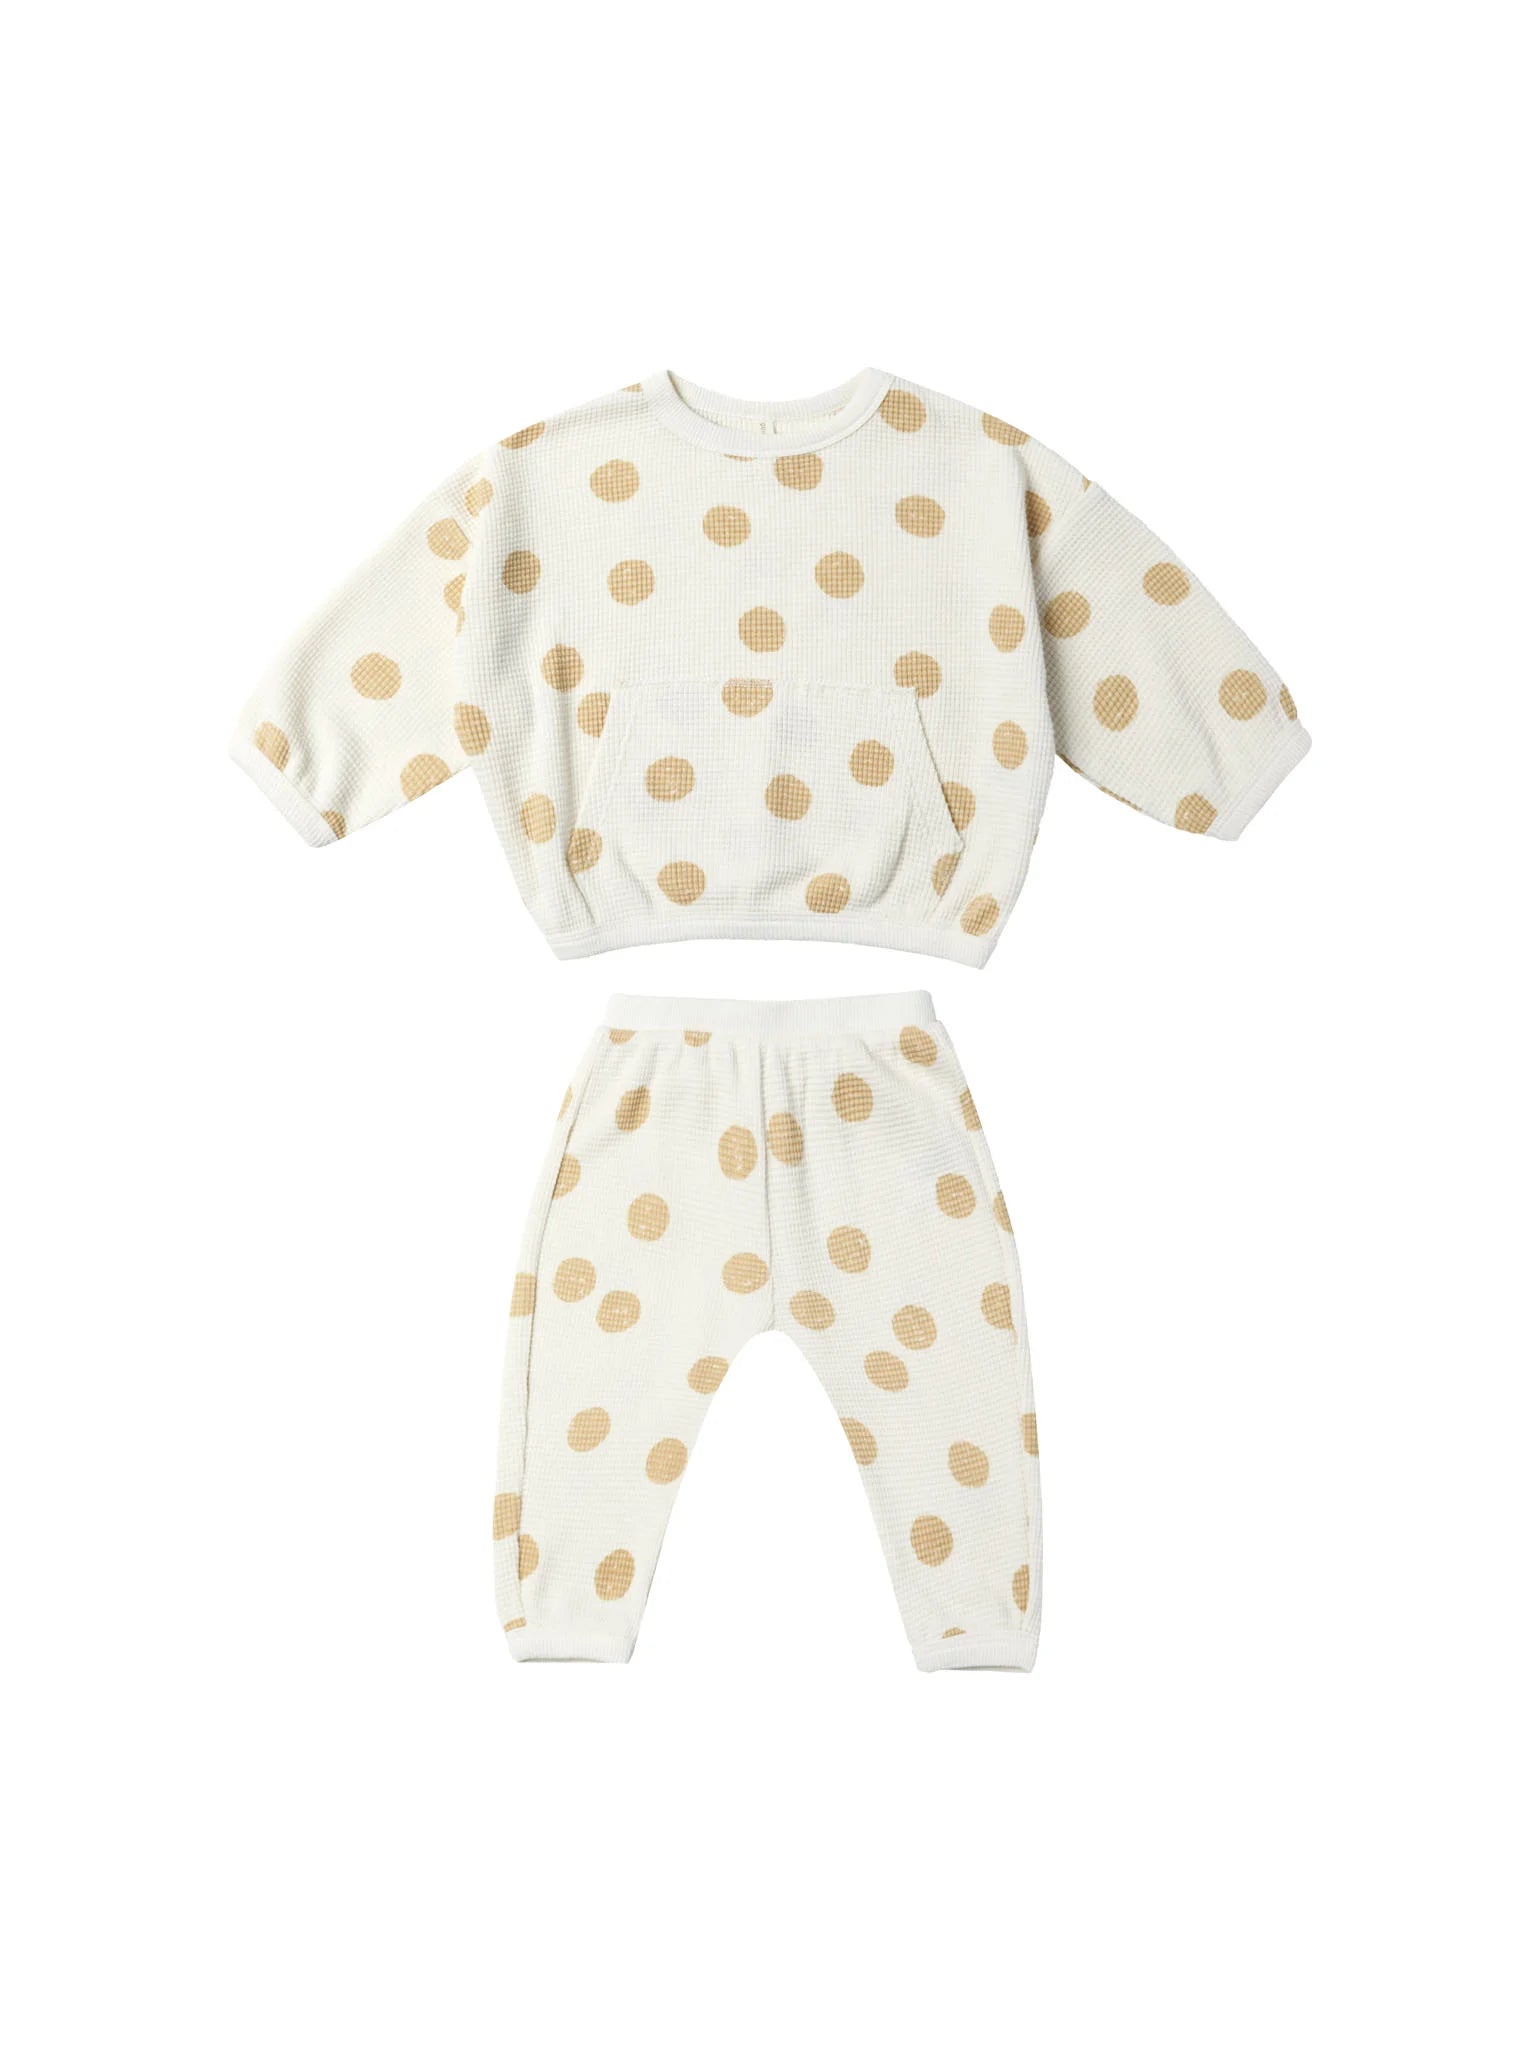 ivory set with butter tan dots all over